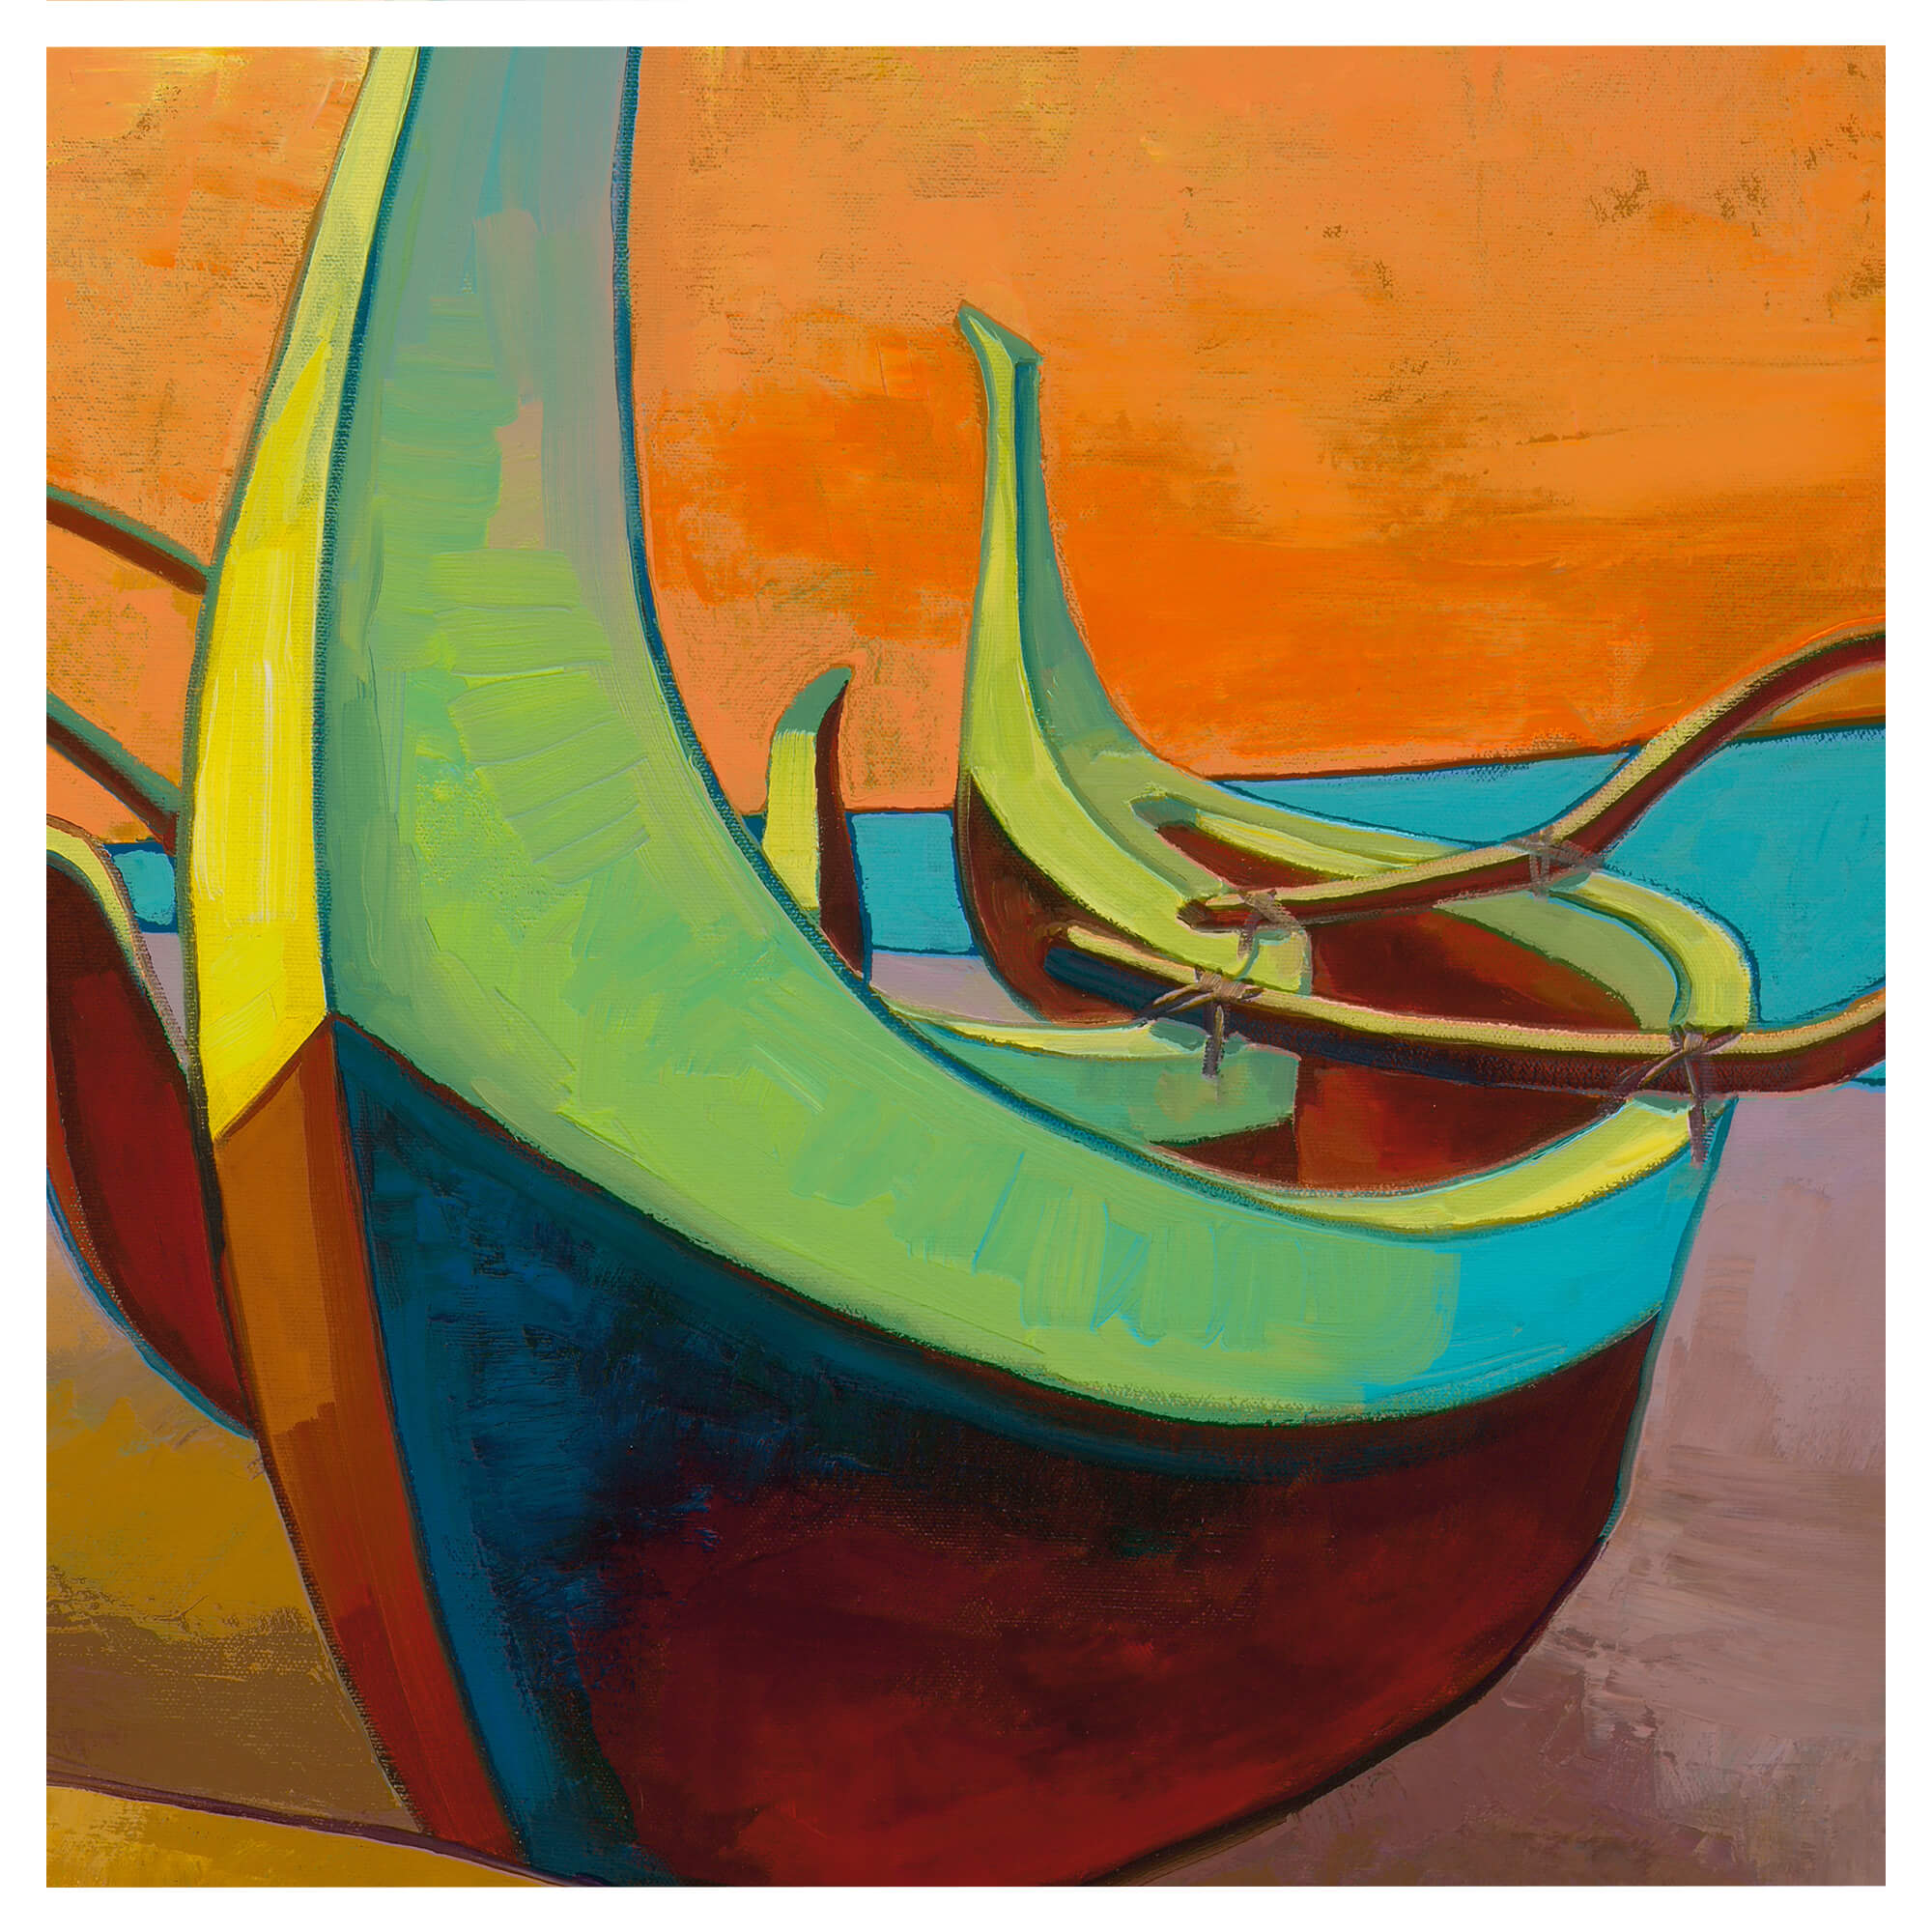 A boat with vintage colors by Hawaii artist Colin Redican